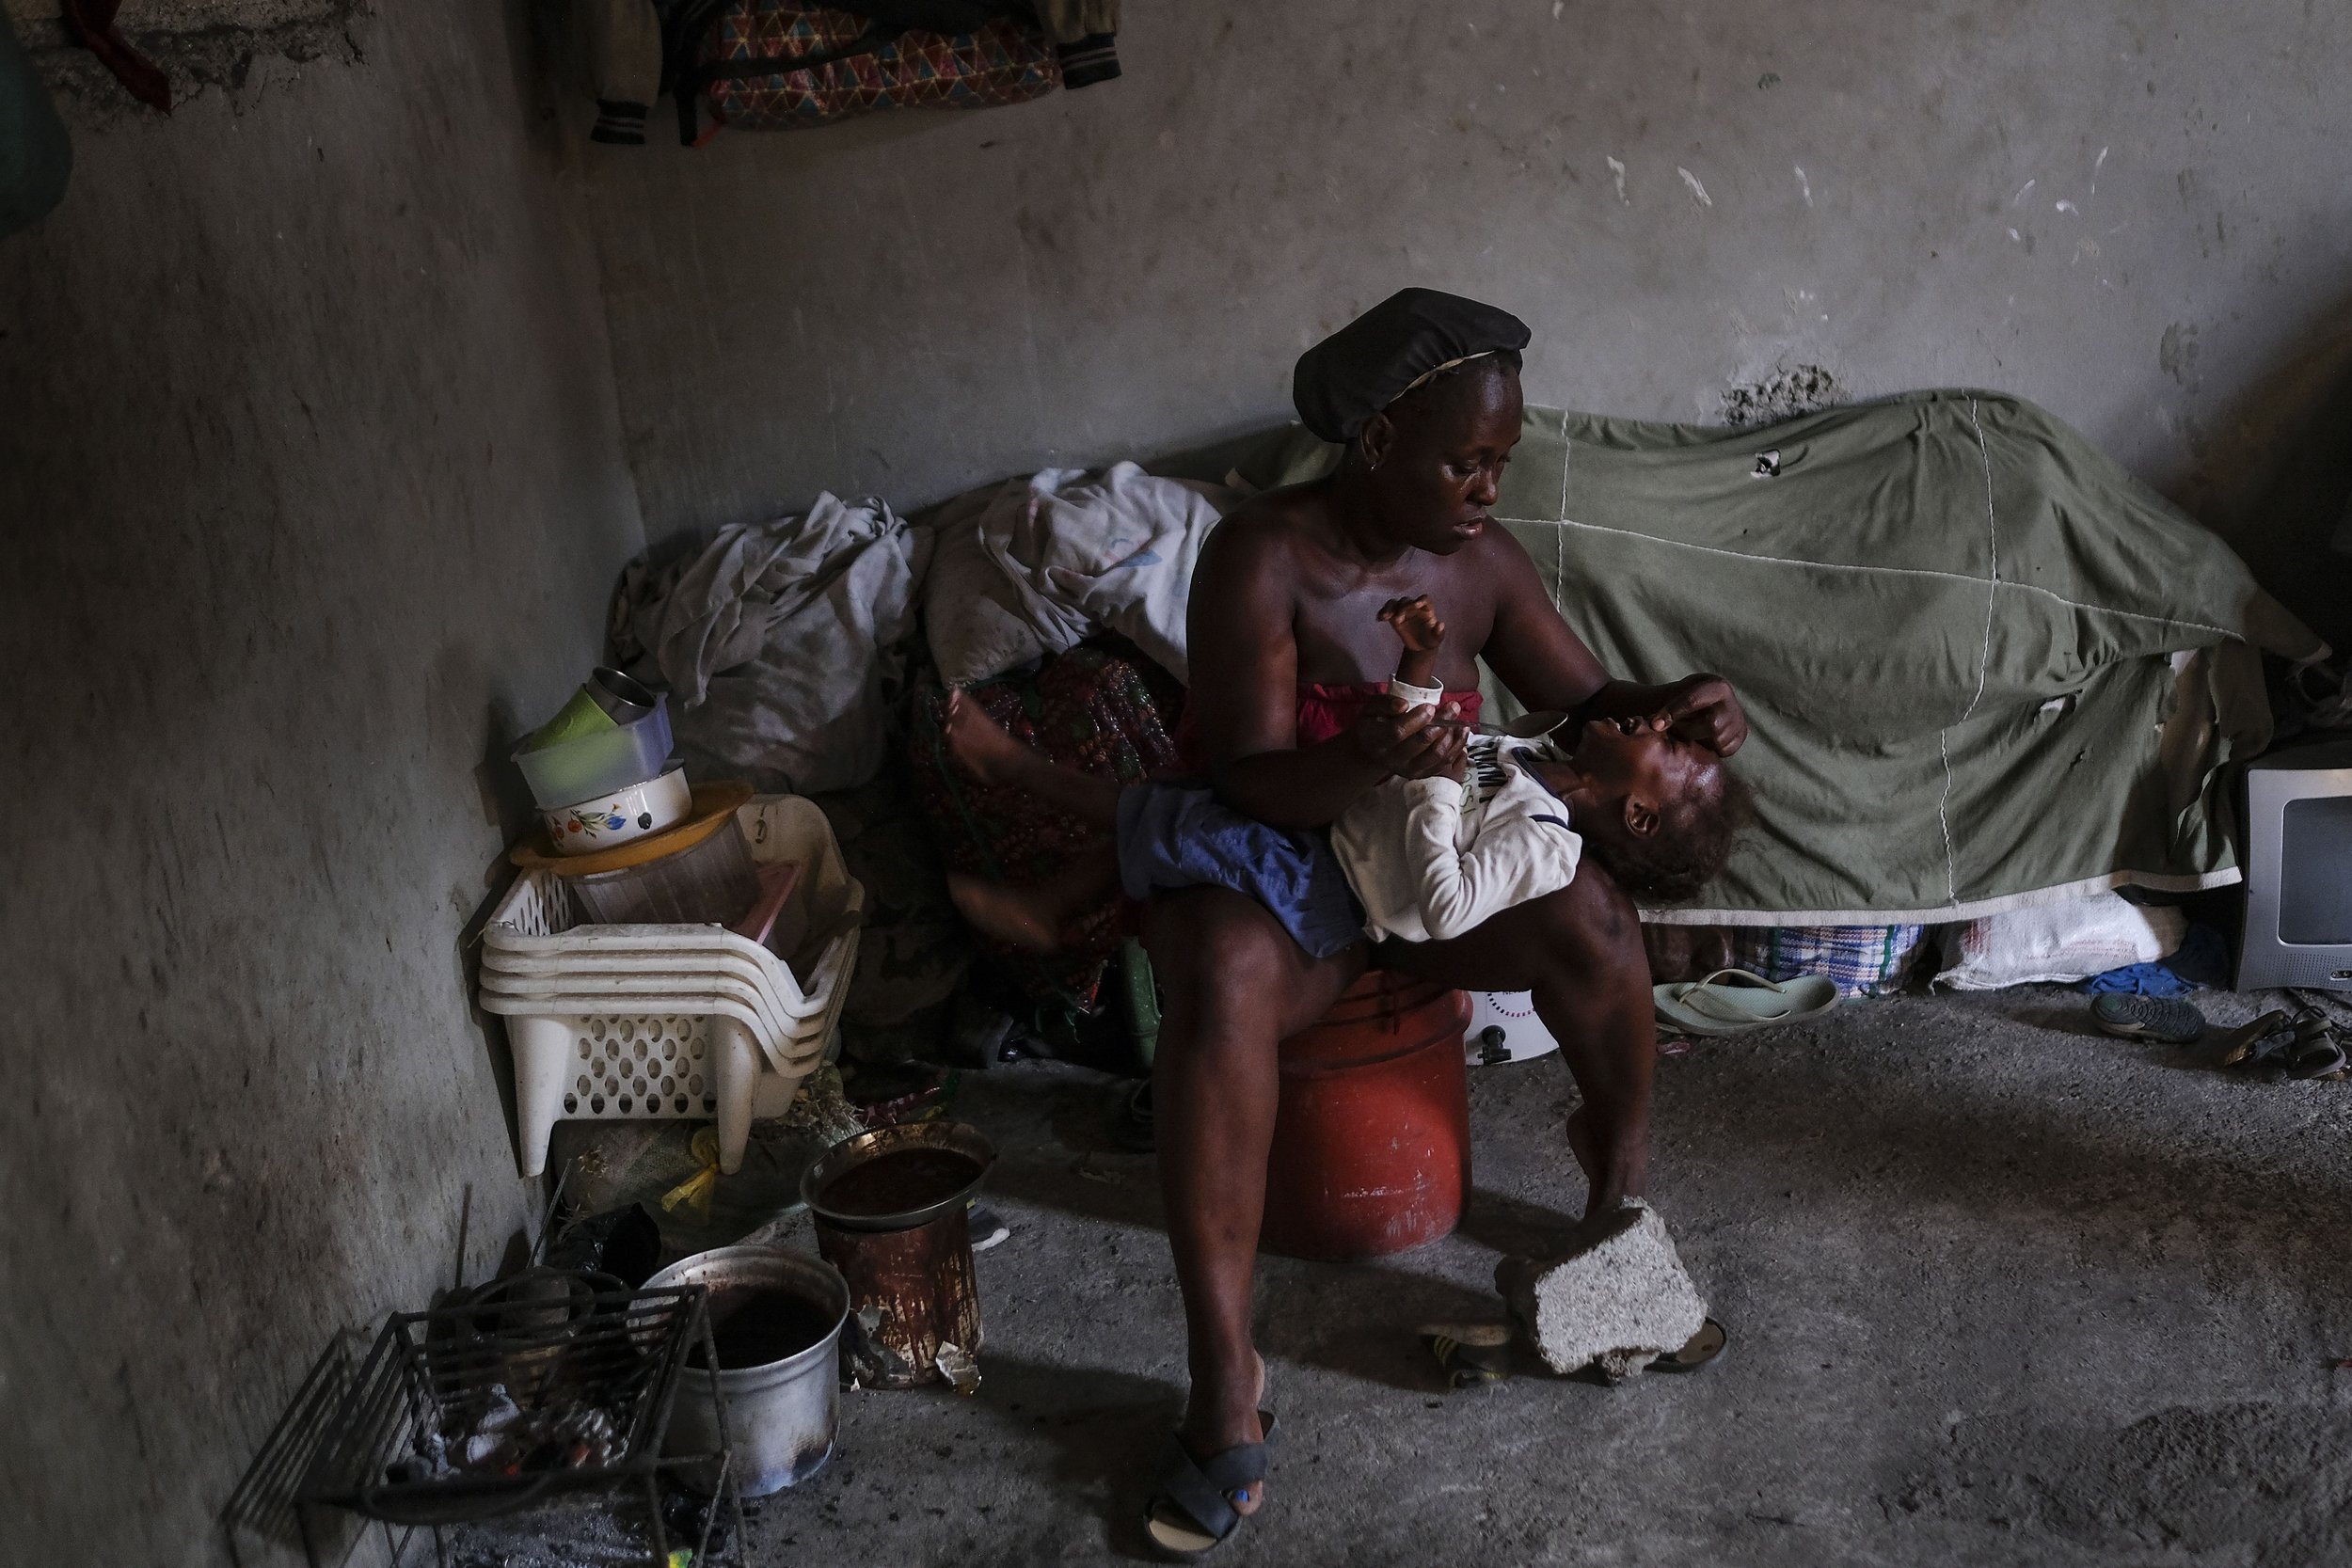  Daphne Lendor attempts to force feed beans to her daughter, who refuses to eat, at a shelter for families displaced by gang violence at the Saint Yves Church in Port-au-Prince, Haiti, on Oct. 29, 2021. (AP Photo/Matias Delacroix) 